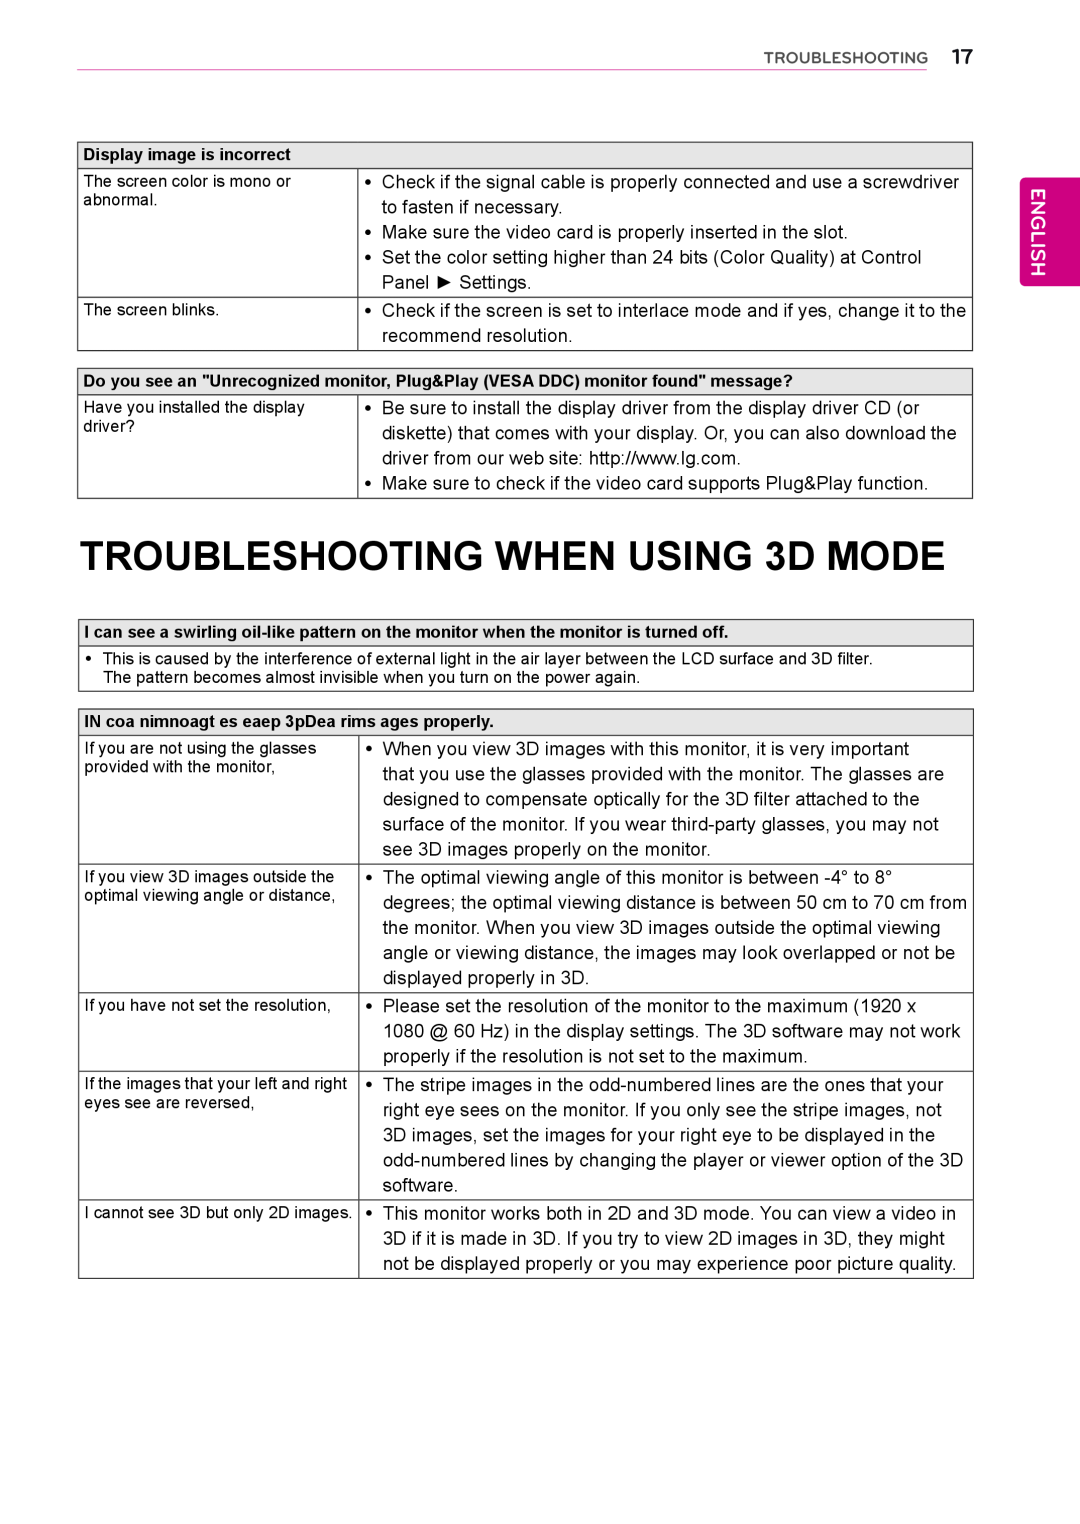 LG Electronics D2342P owner manual TROUBLESHOOTING WHEN USING 3D MODE 